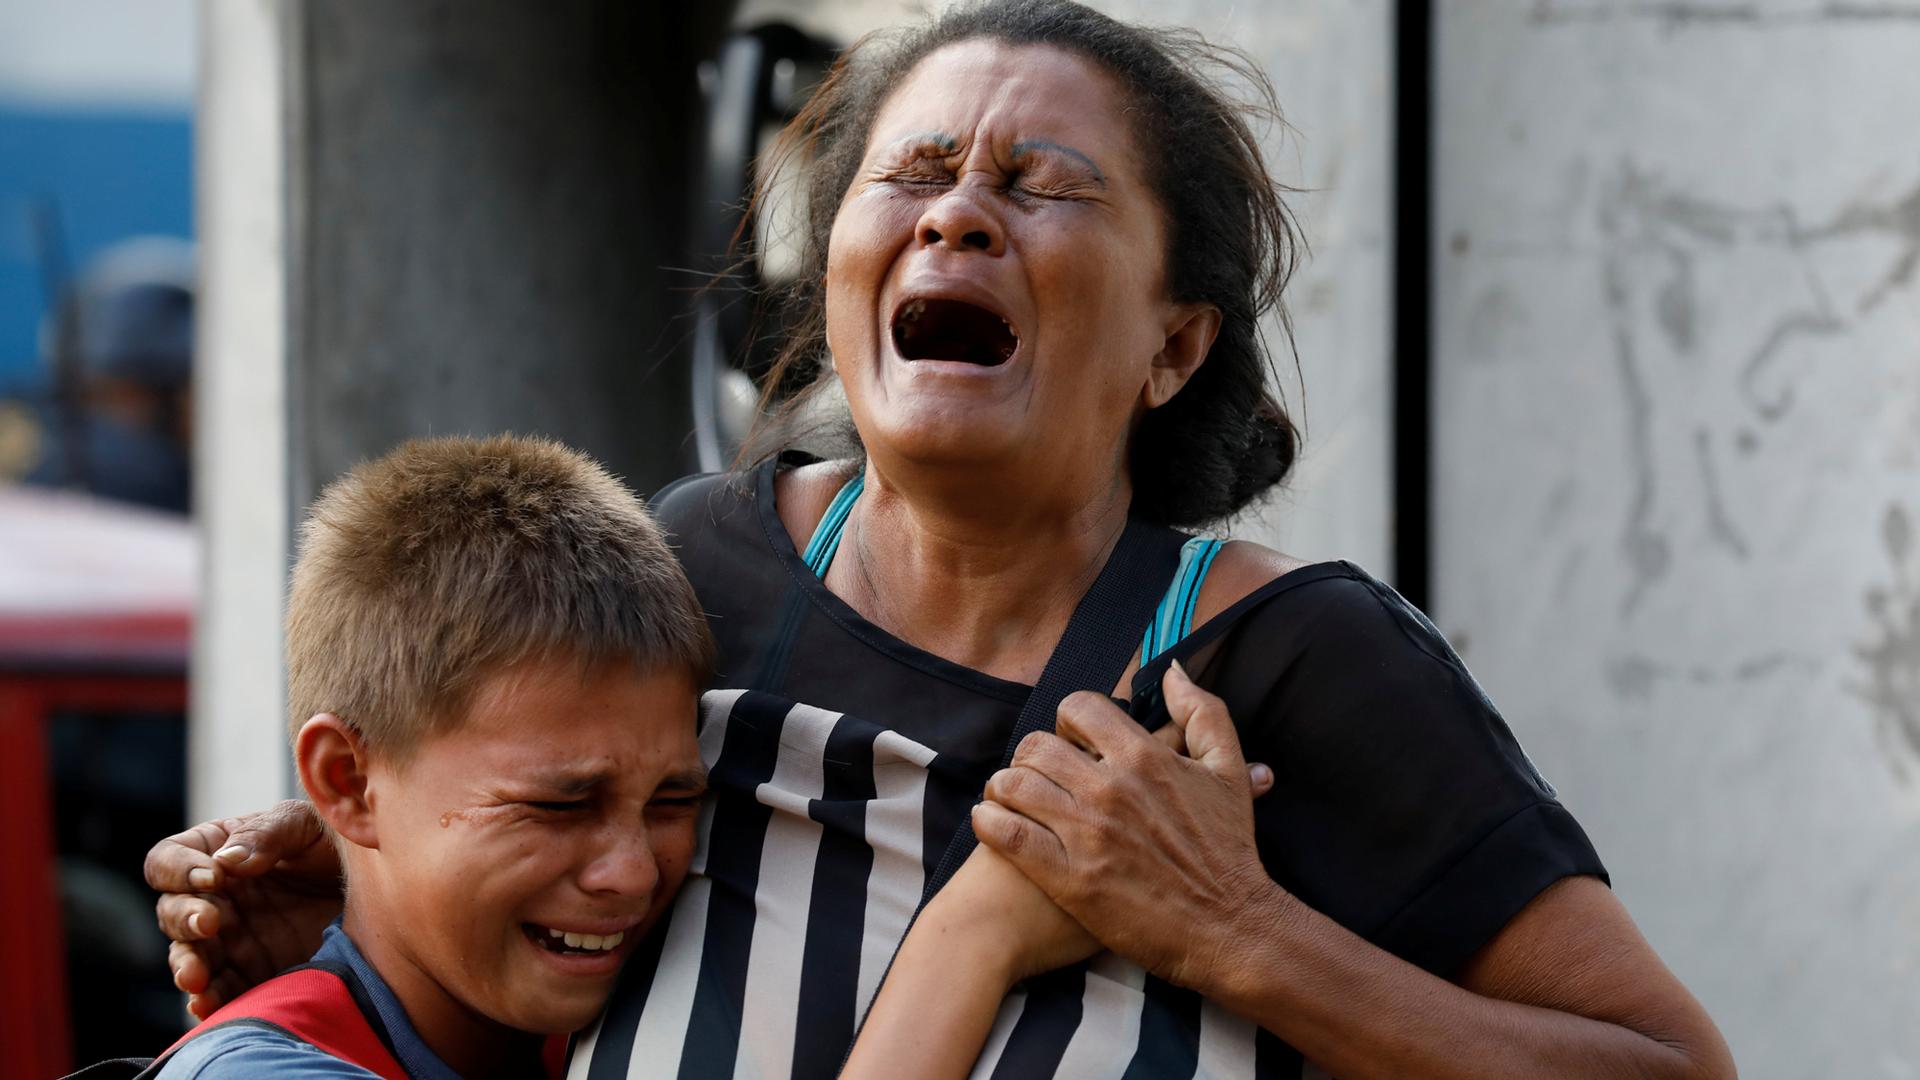 Relatives of inmates held at the General Command of the Carabobo Police react as they wait outside the prison, where a fire occurred in the cells area, according to local media, in Valencia, Venezuela, March 28, 2018.